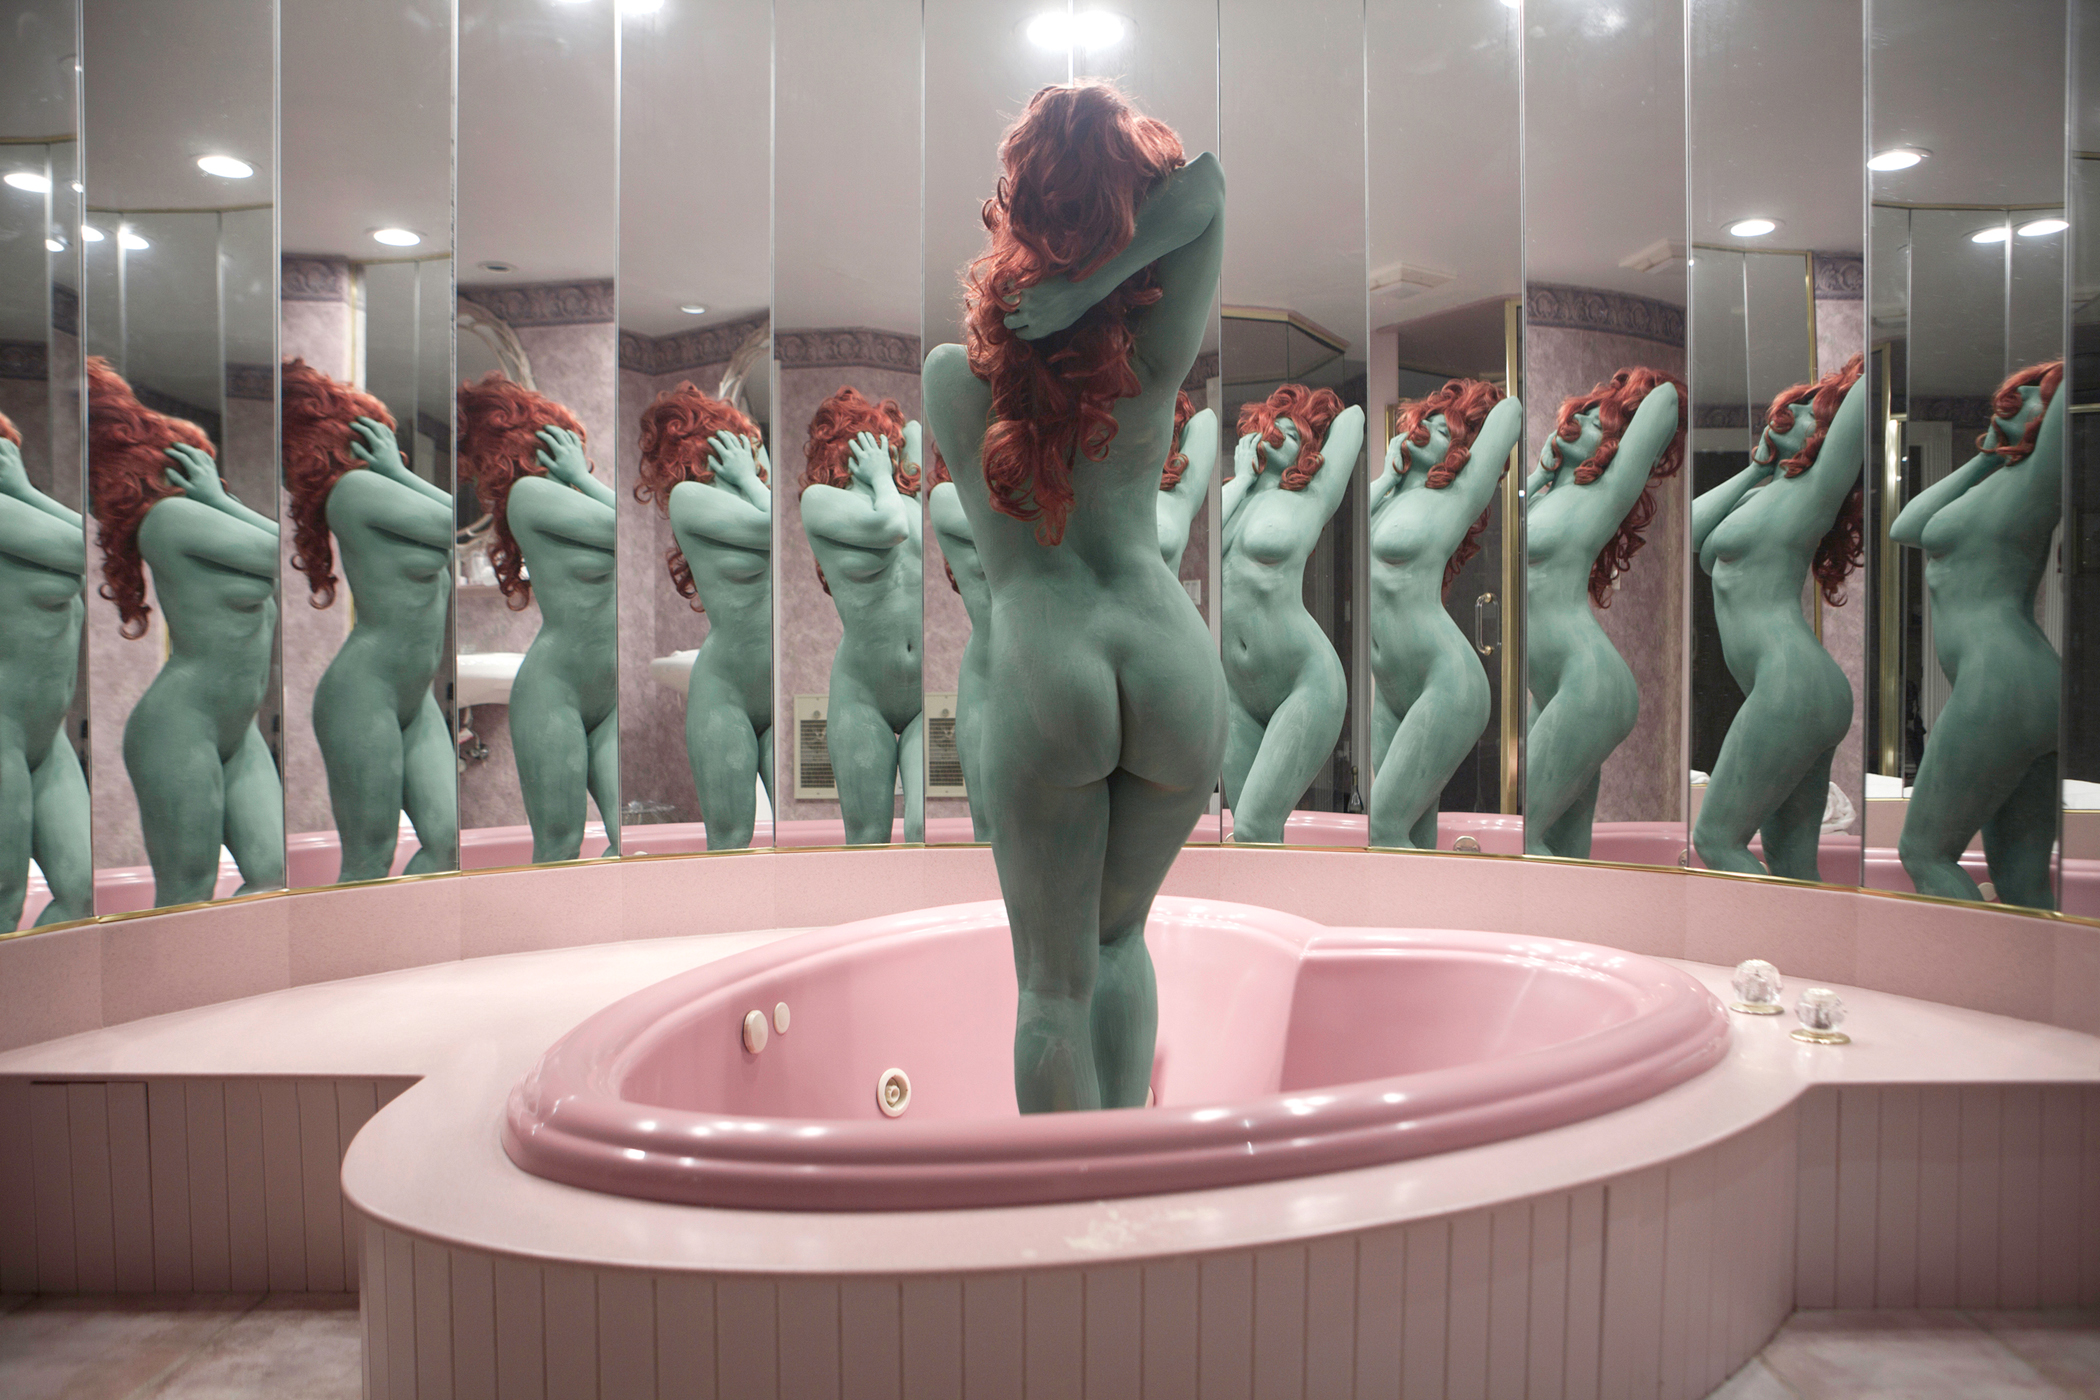 Juno Calypso Thehoneymoon A Dream In Green 2015 Courtesy Of The Artist And TJ Boulting